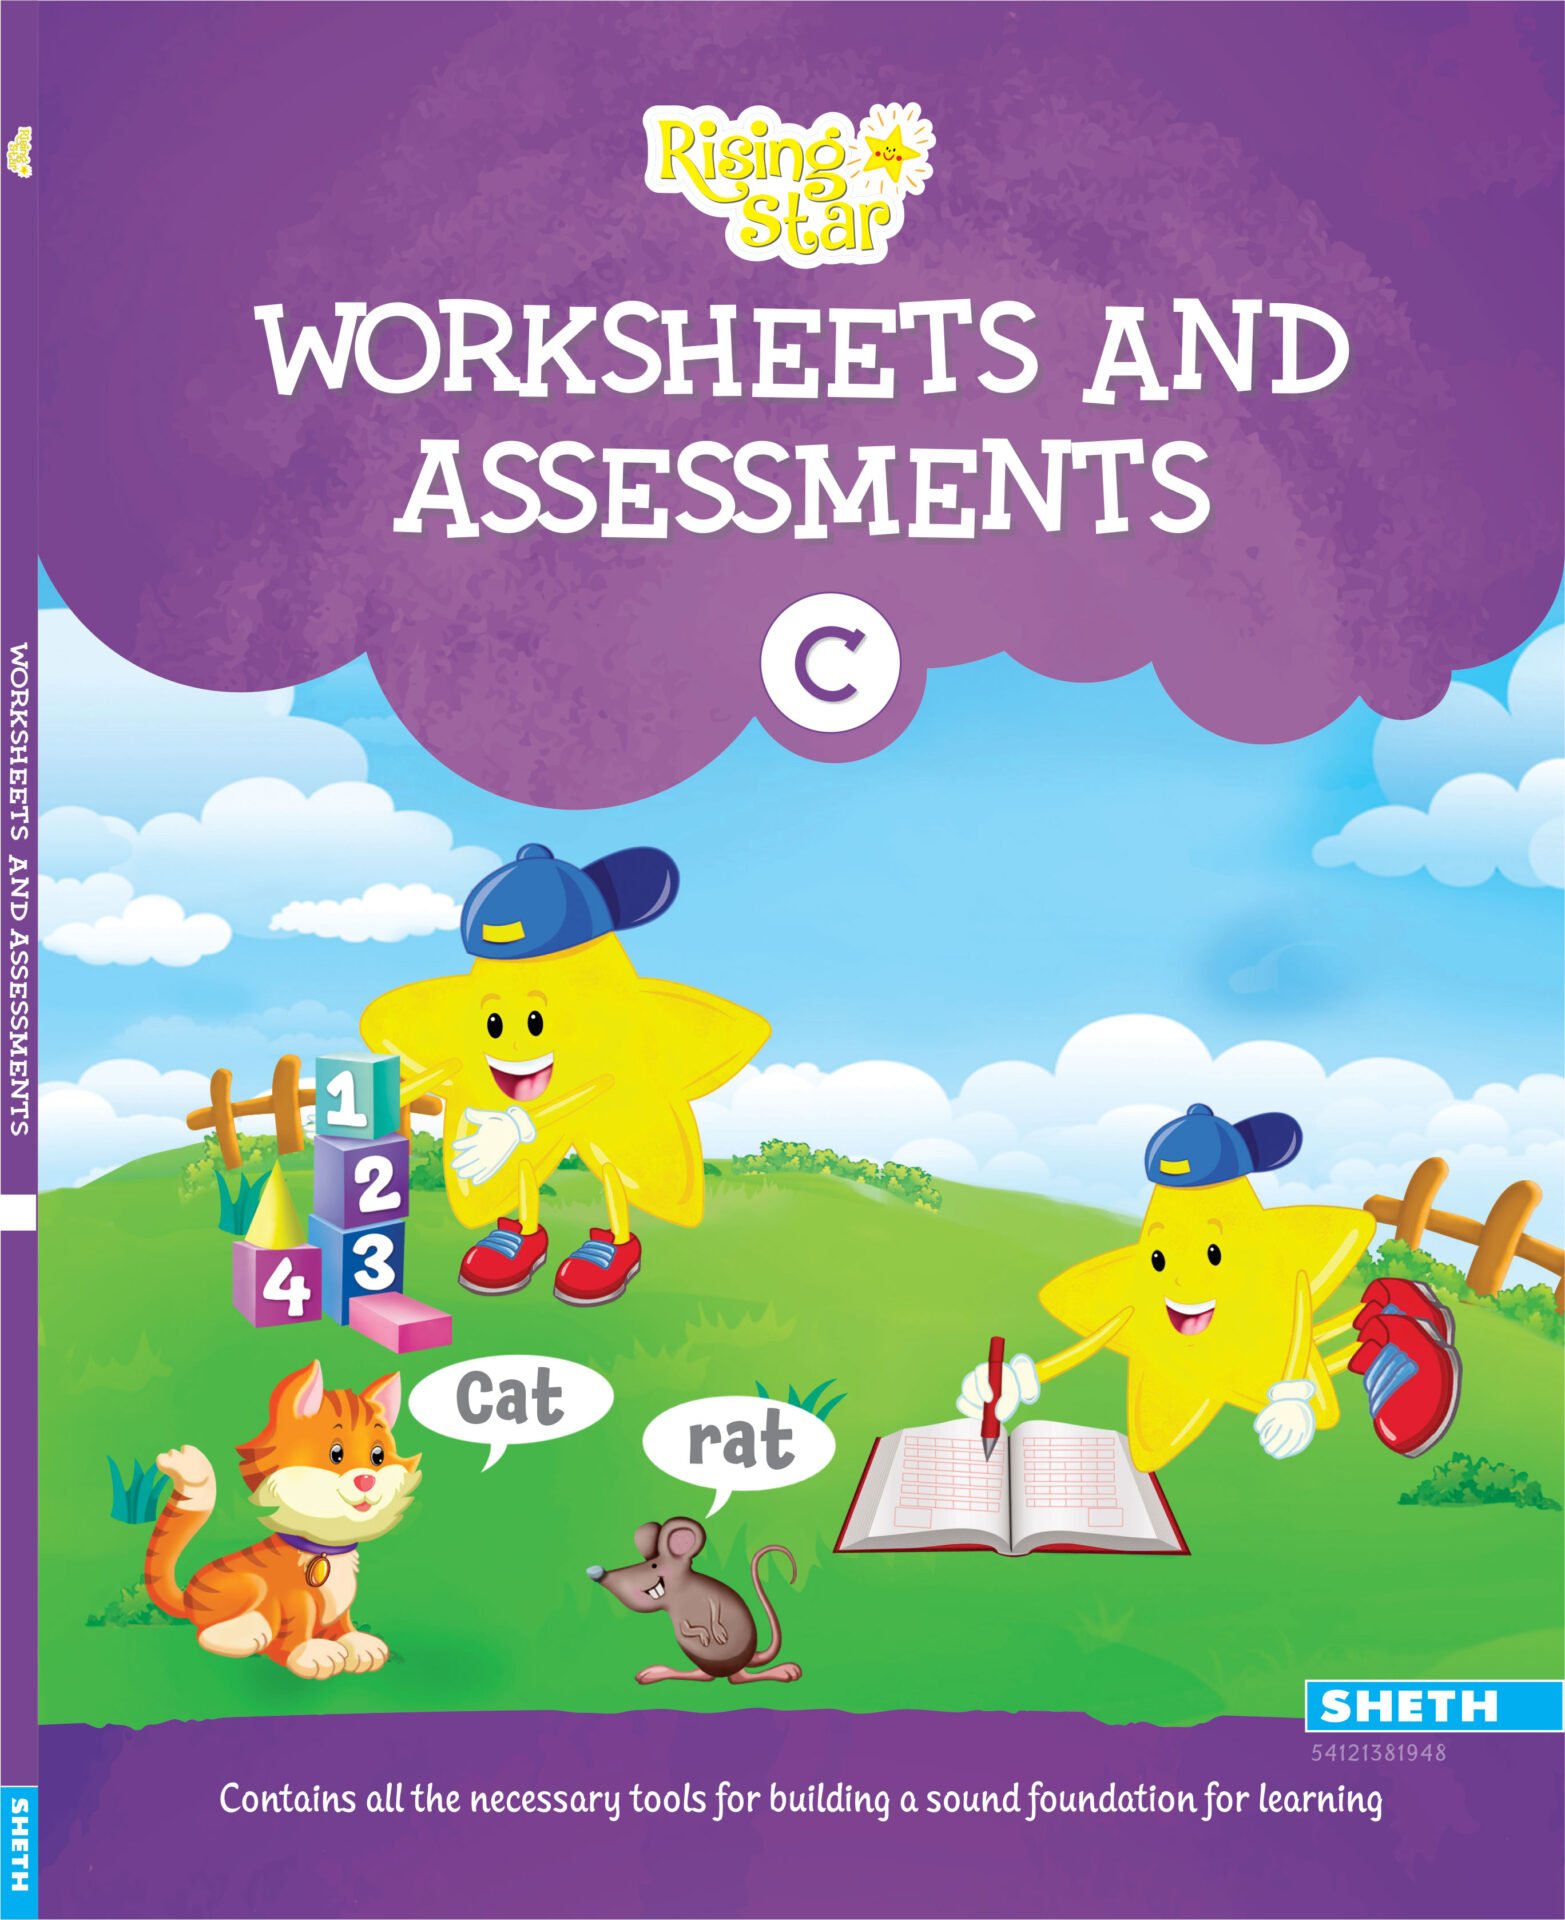 Rising Star Worksheets and Assessments C 1 1